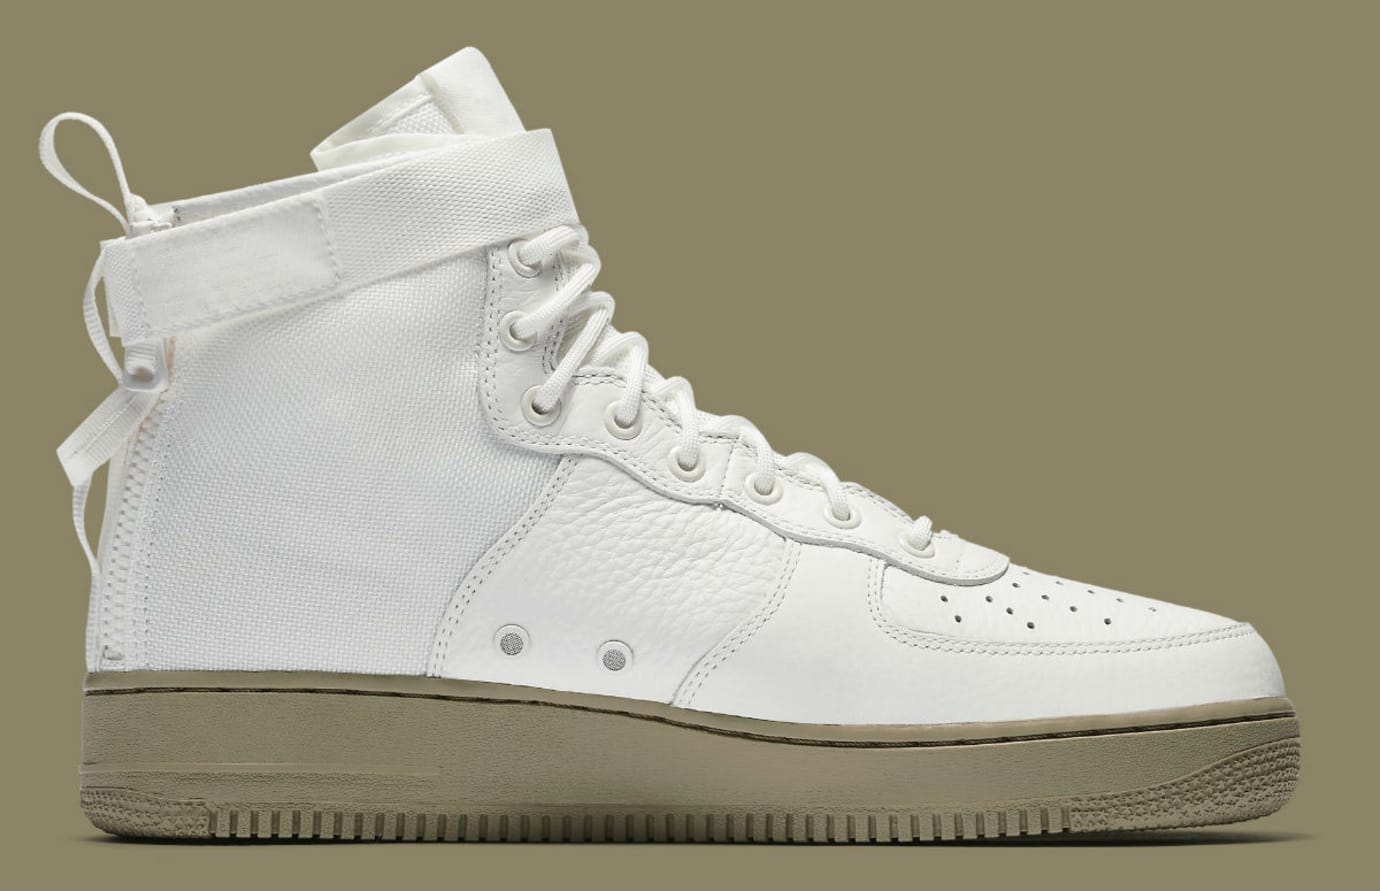 Onbepaald Sportman pakket Nike SF Air Force 1 Mid Ivory Neutral Olive Release Date 917753-101 | Sole  Collector